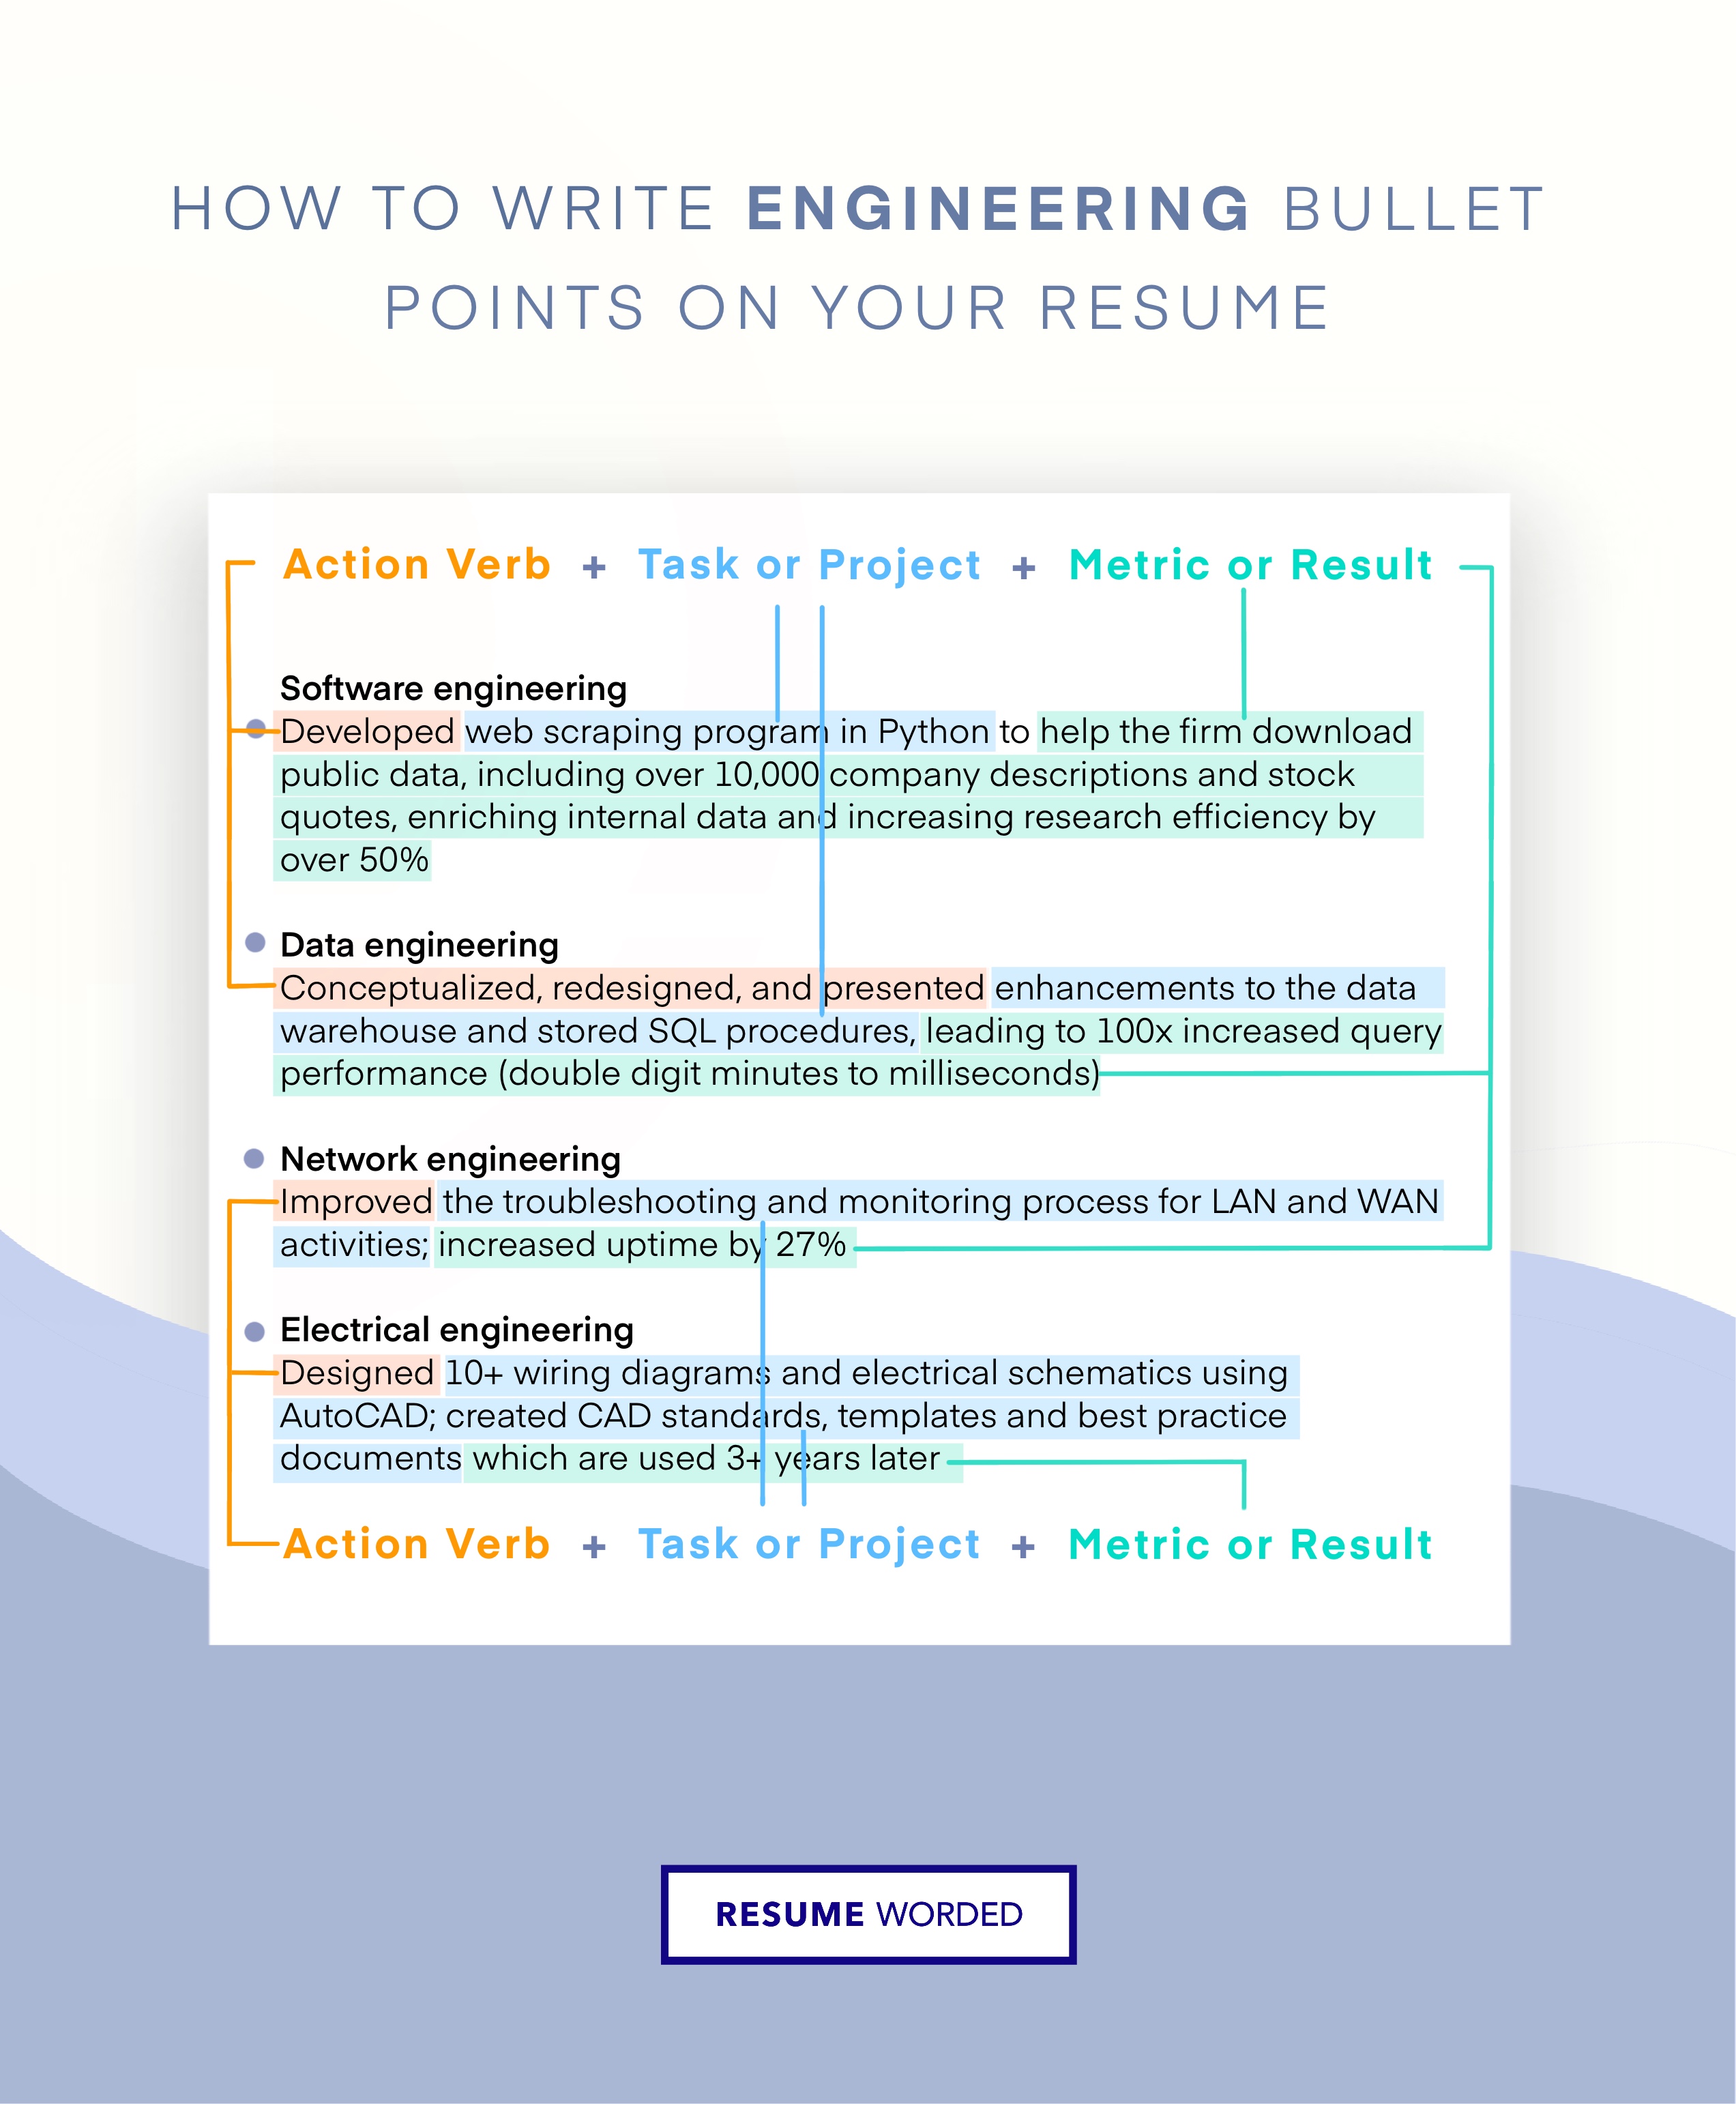 Lists skills and technical skills related to manufacturing engineering - Manufacturing Engineer Resume